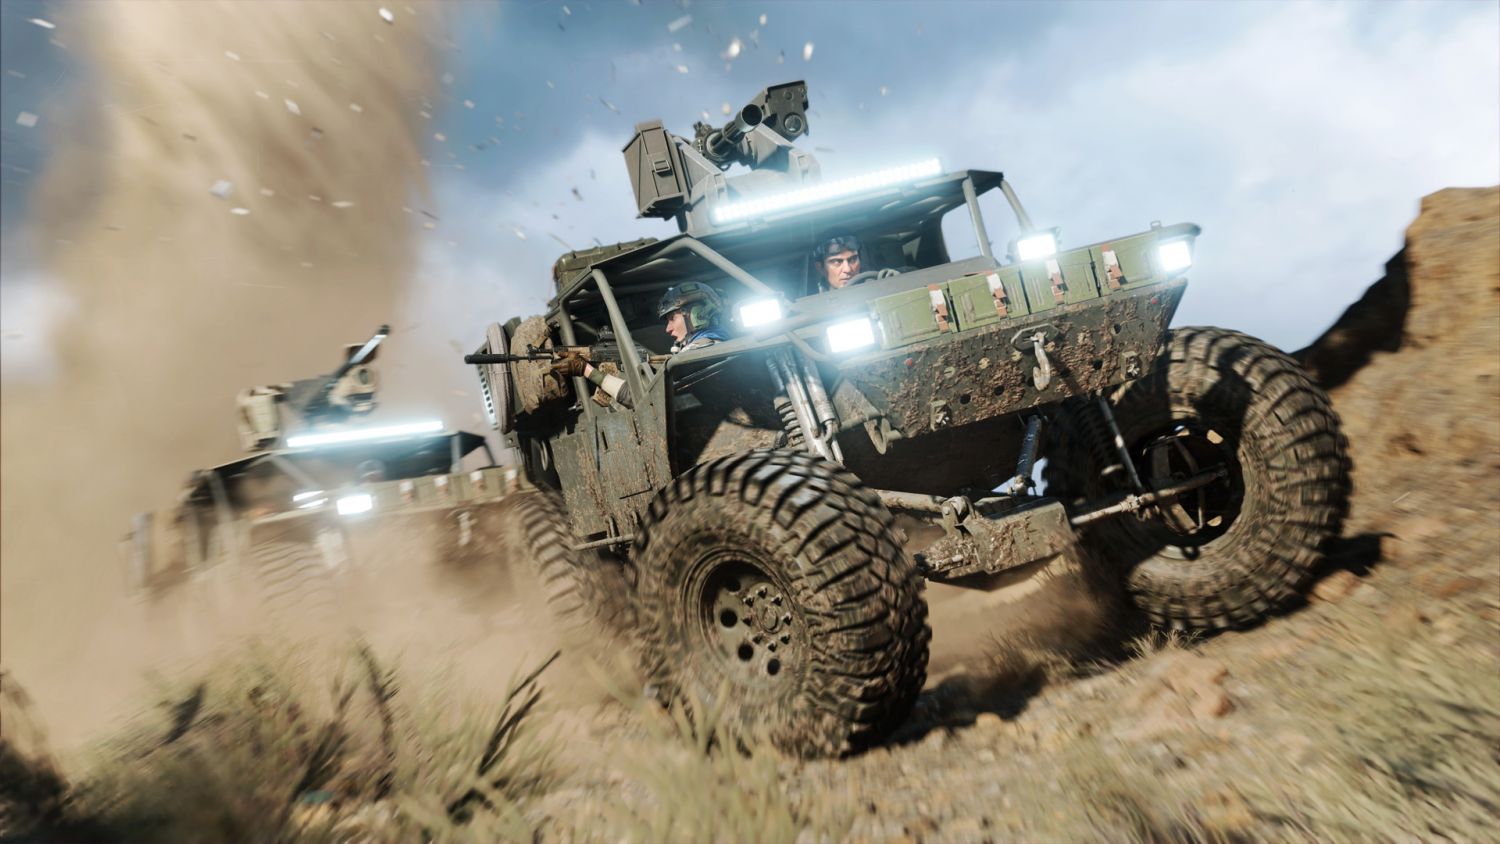 Vehicular combat is back again in Battlefield 2042